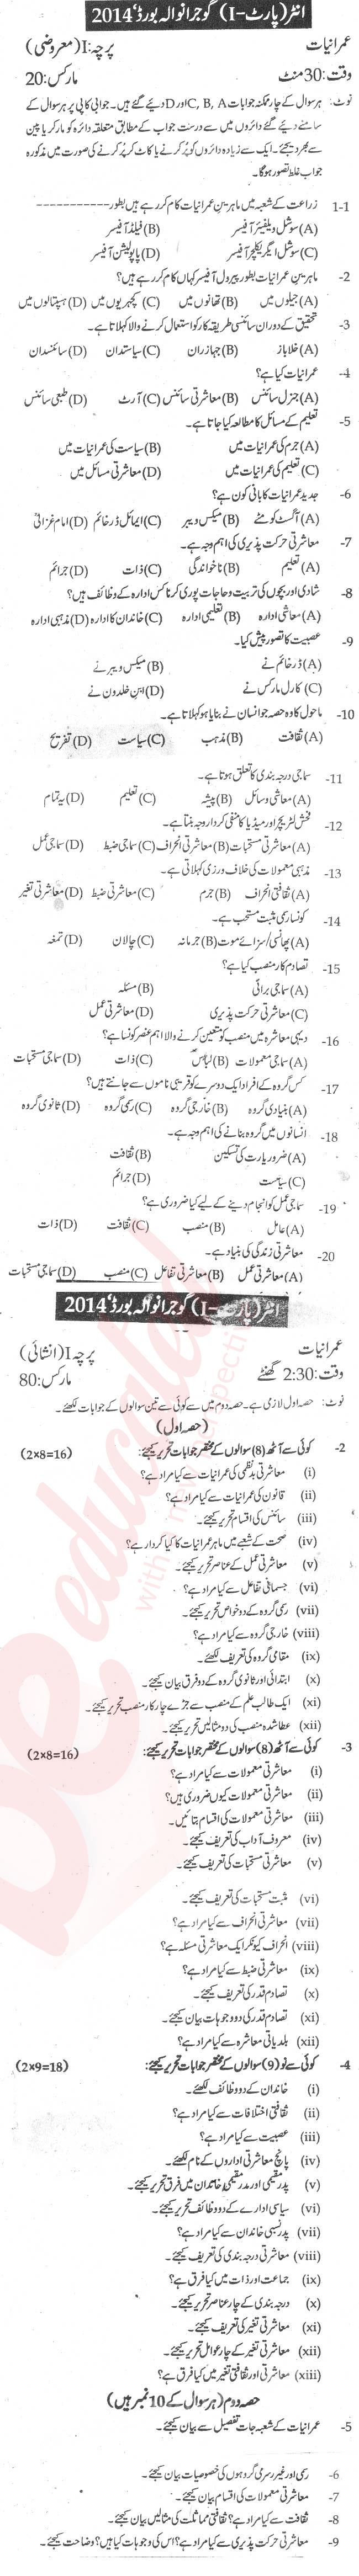 Sociology FA Part 1 Past Paper Group 1 BISE Gujranwala 2014